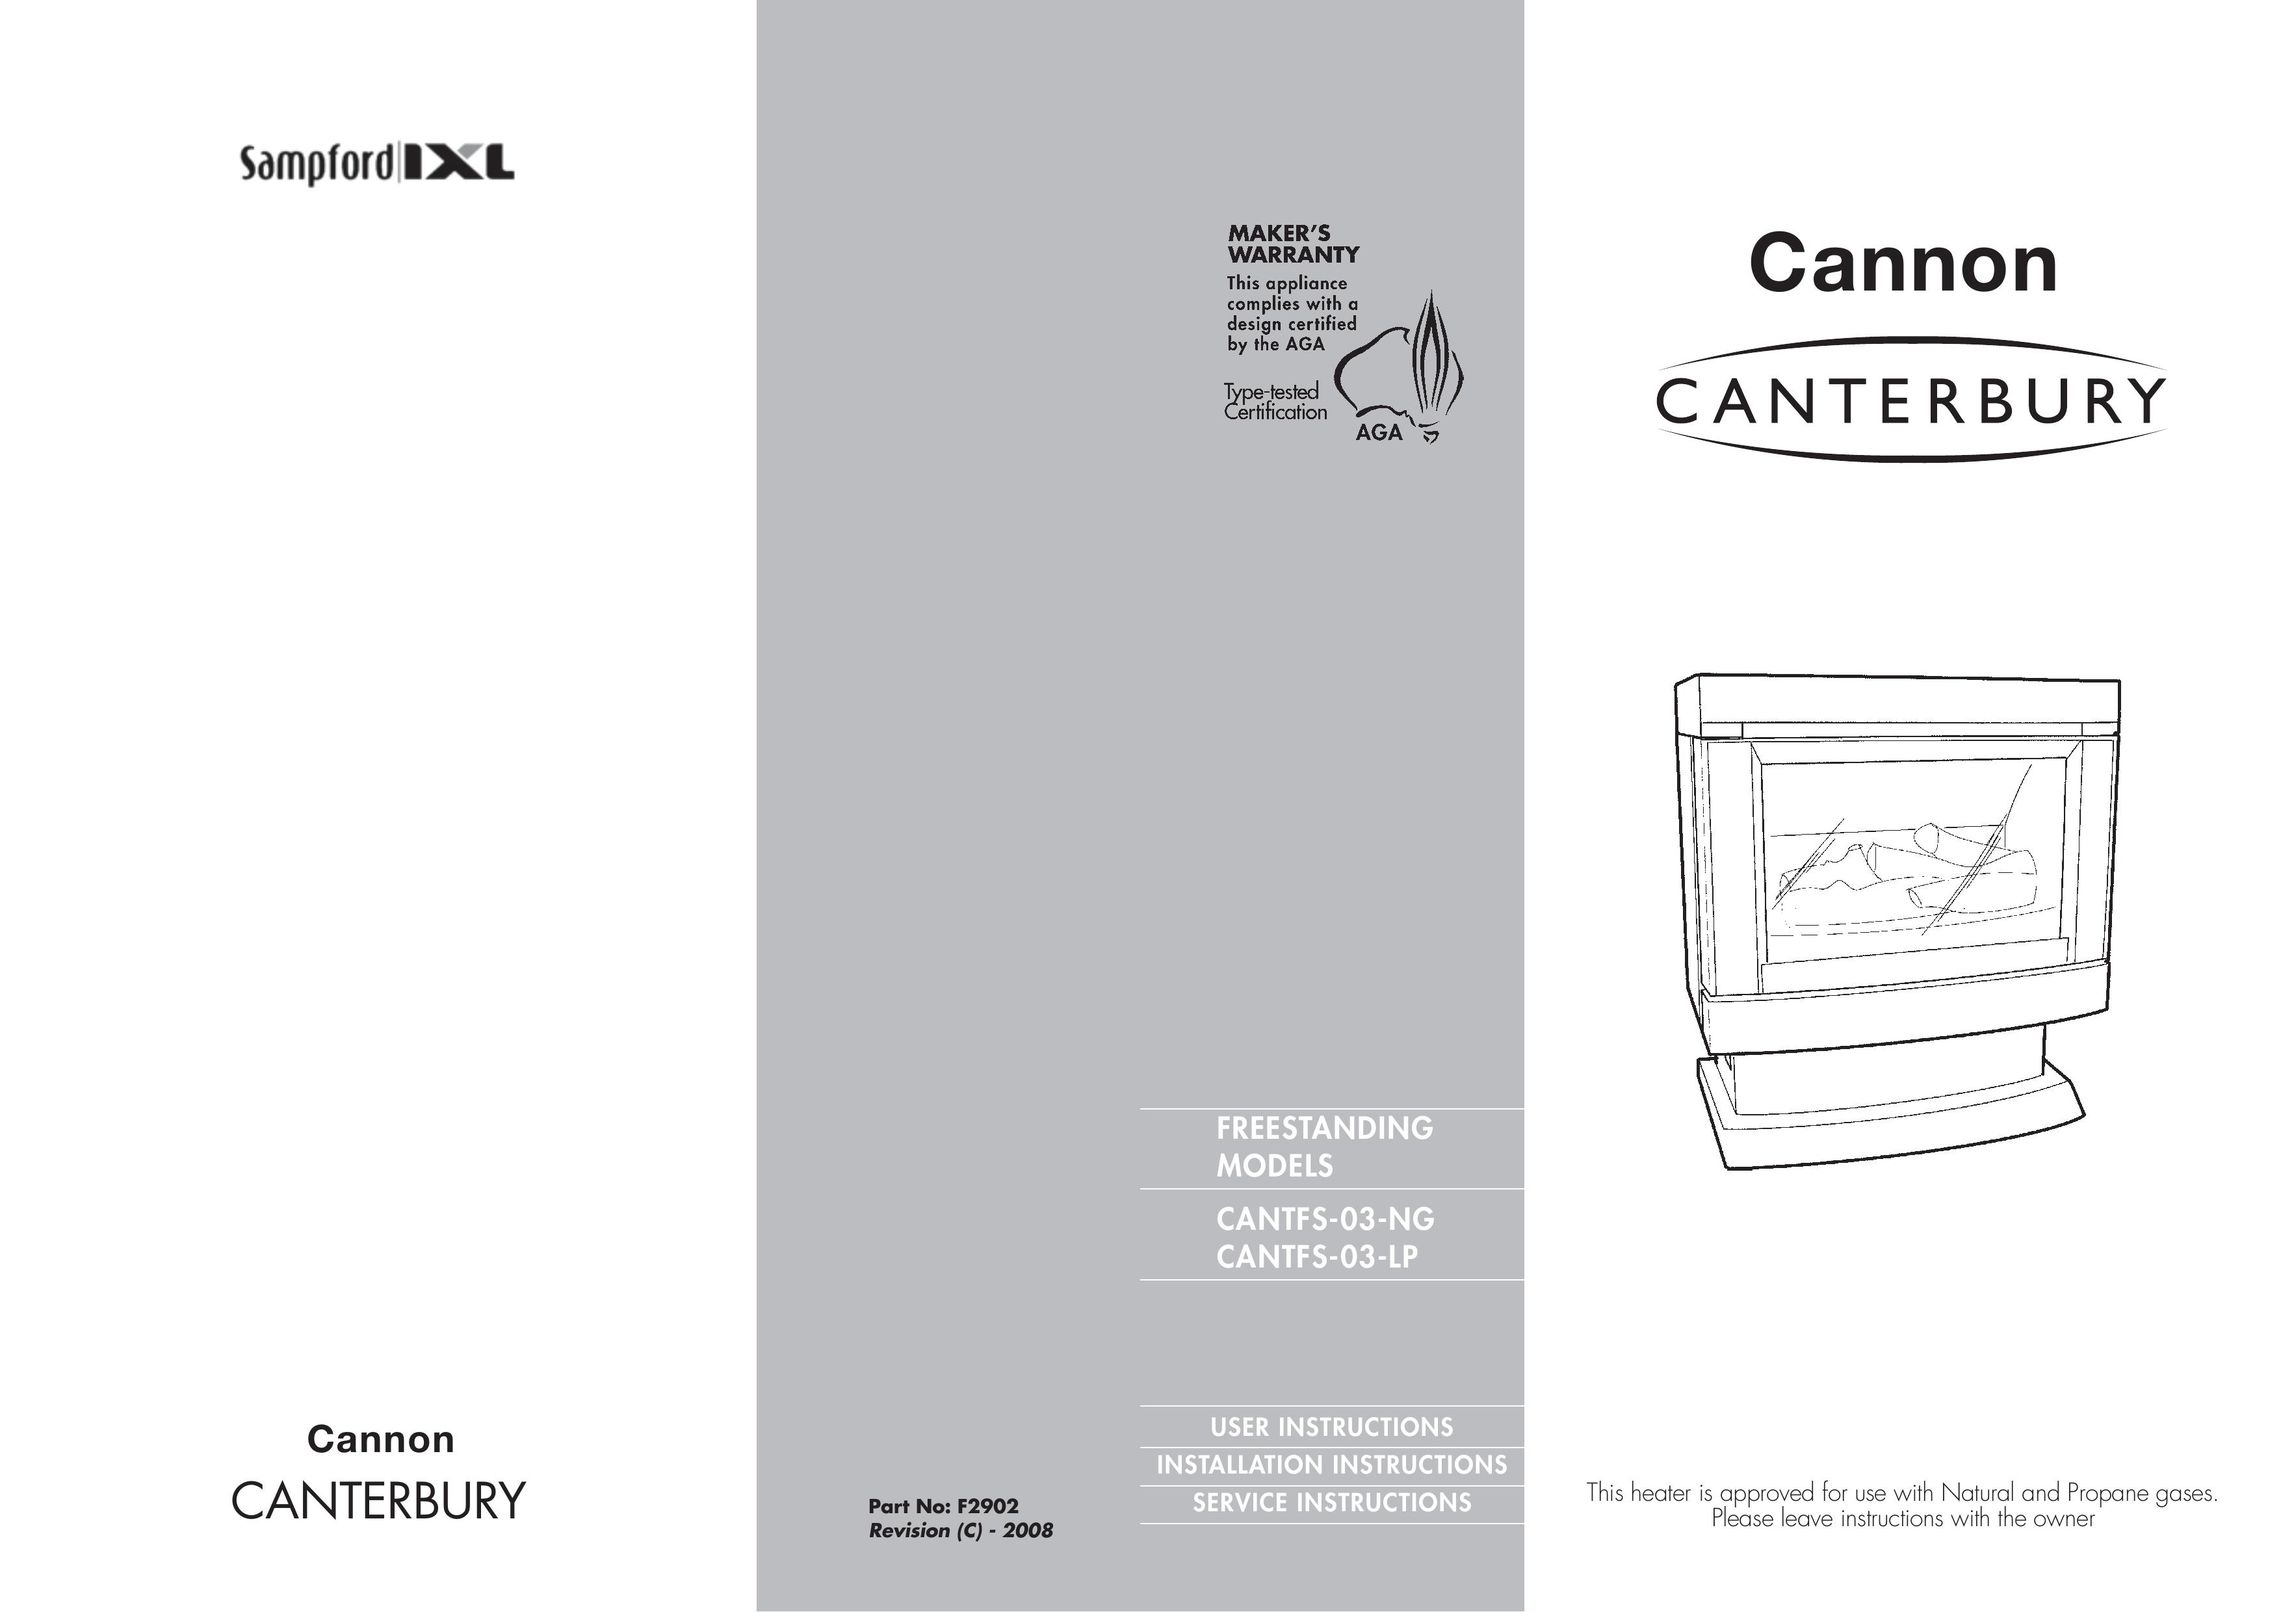 Cannon CANTFS-03-NG Gas Heater User Manual